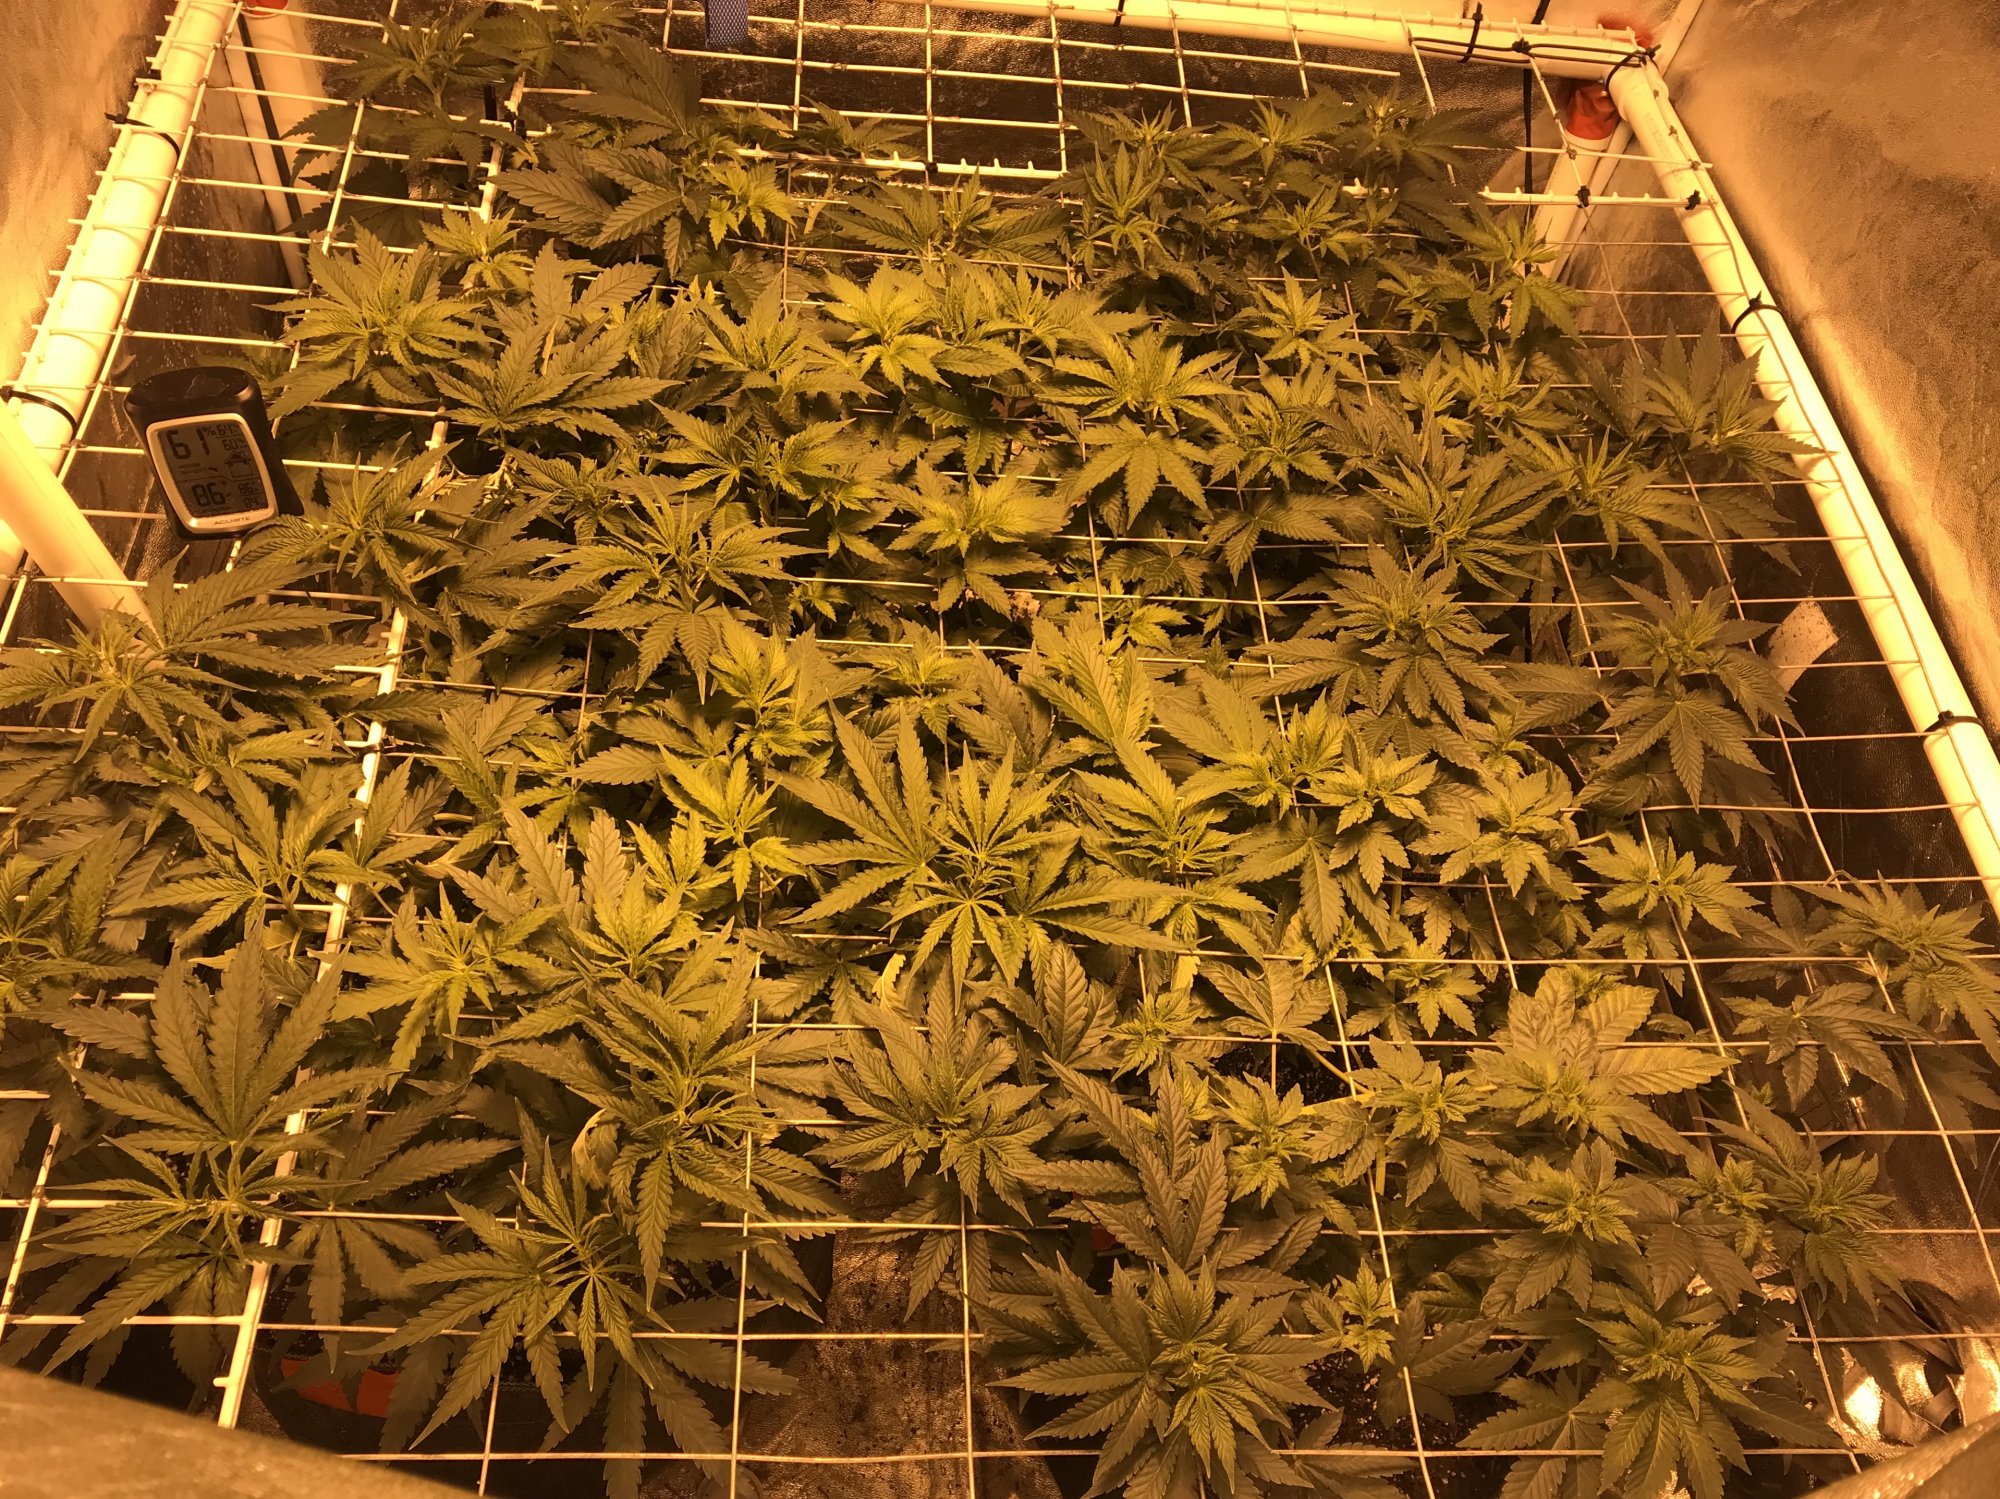 How filled do you let your scrog go before flipping